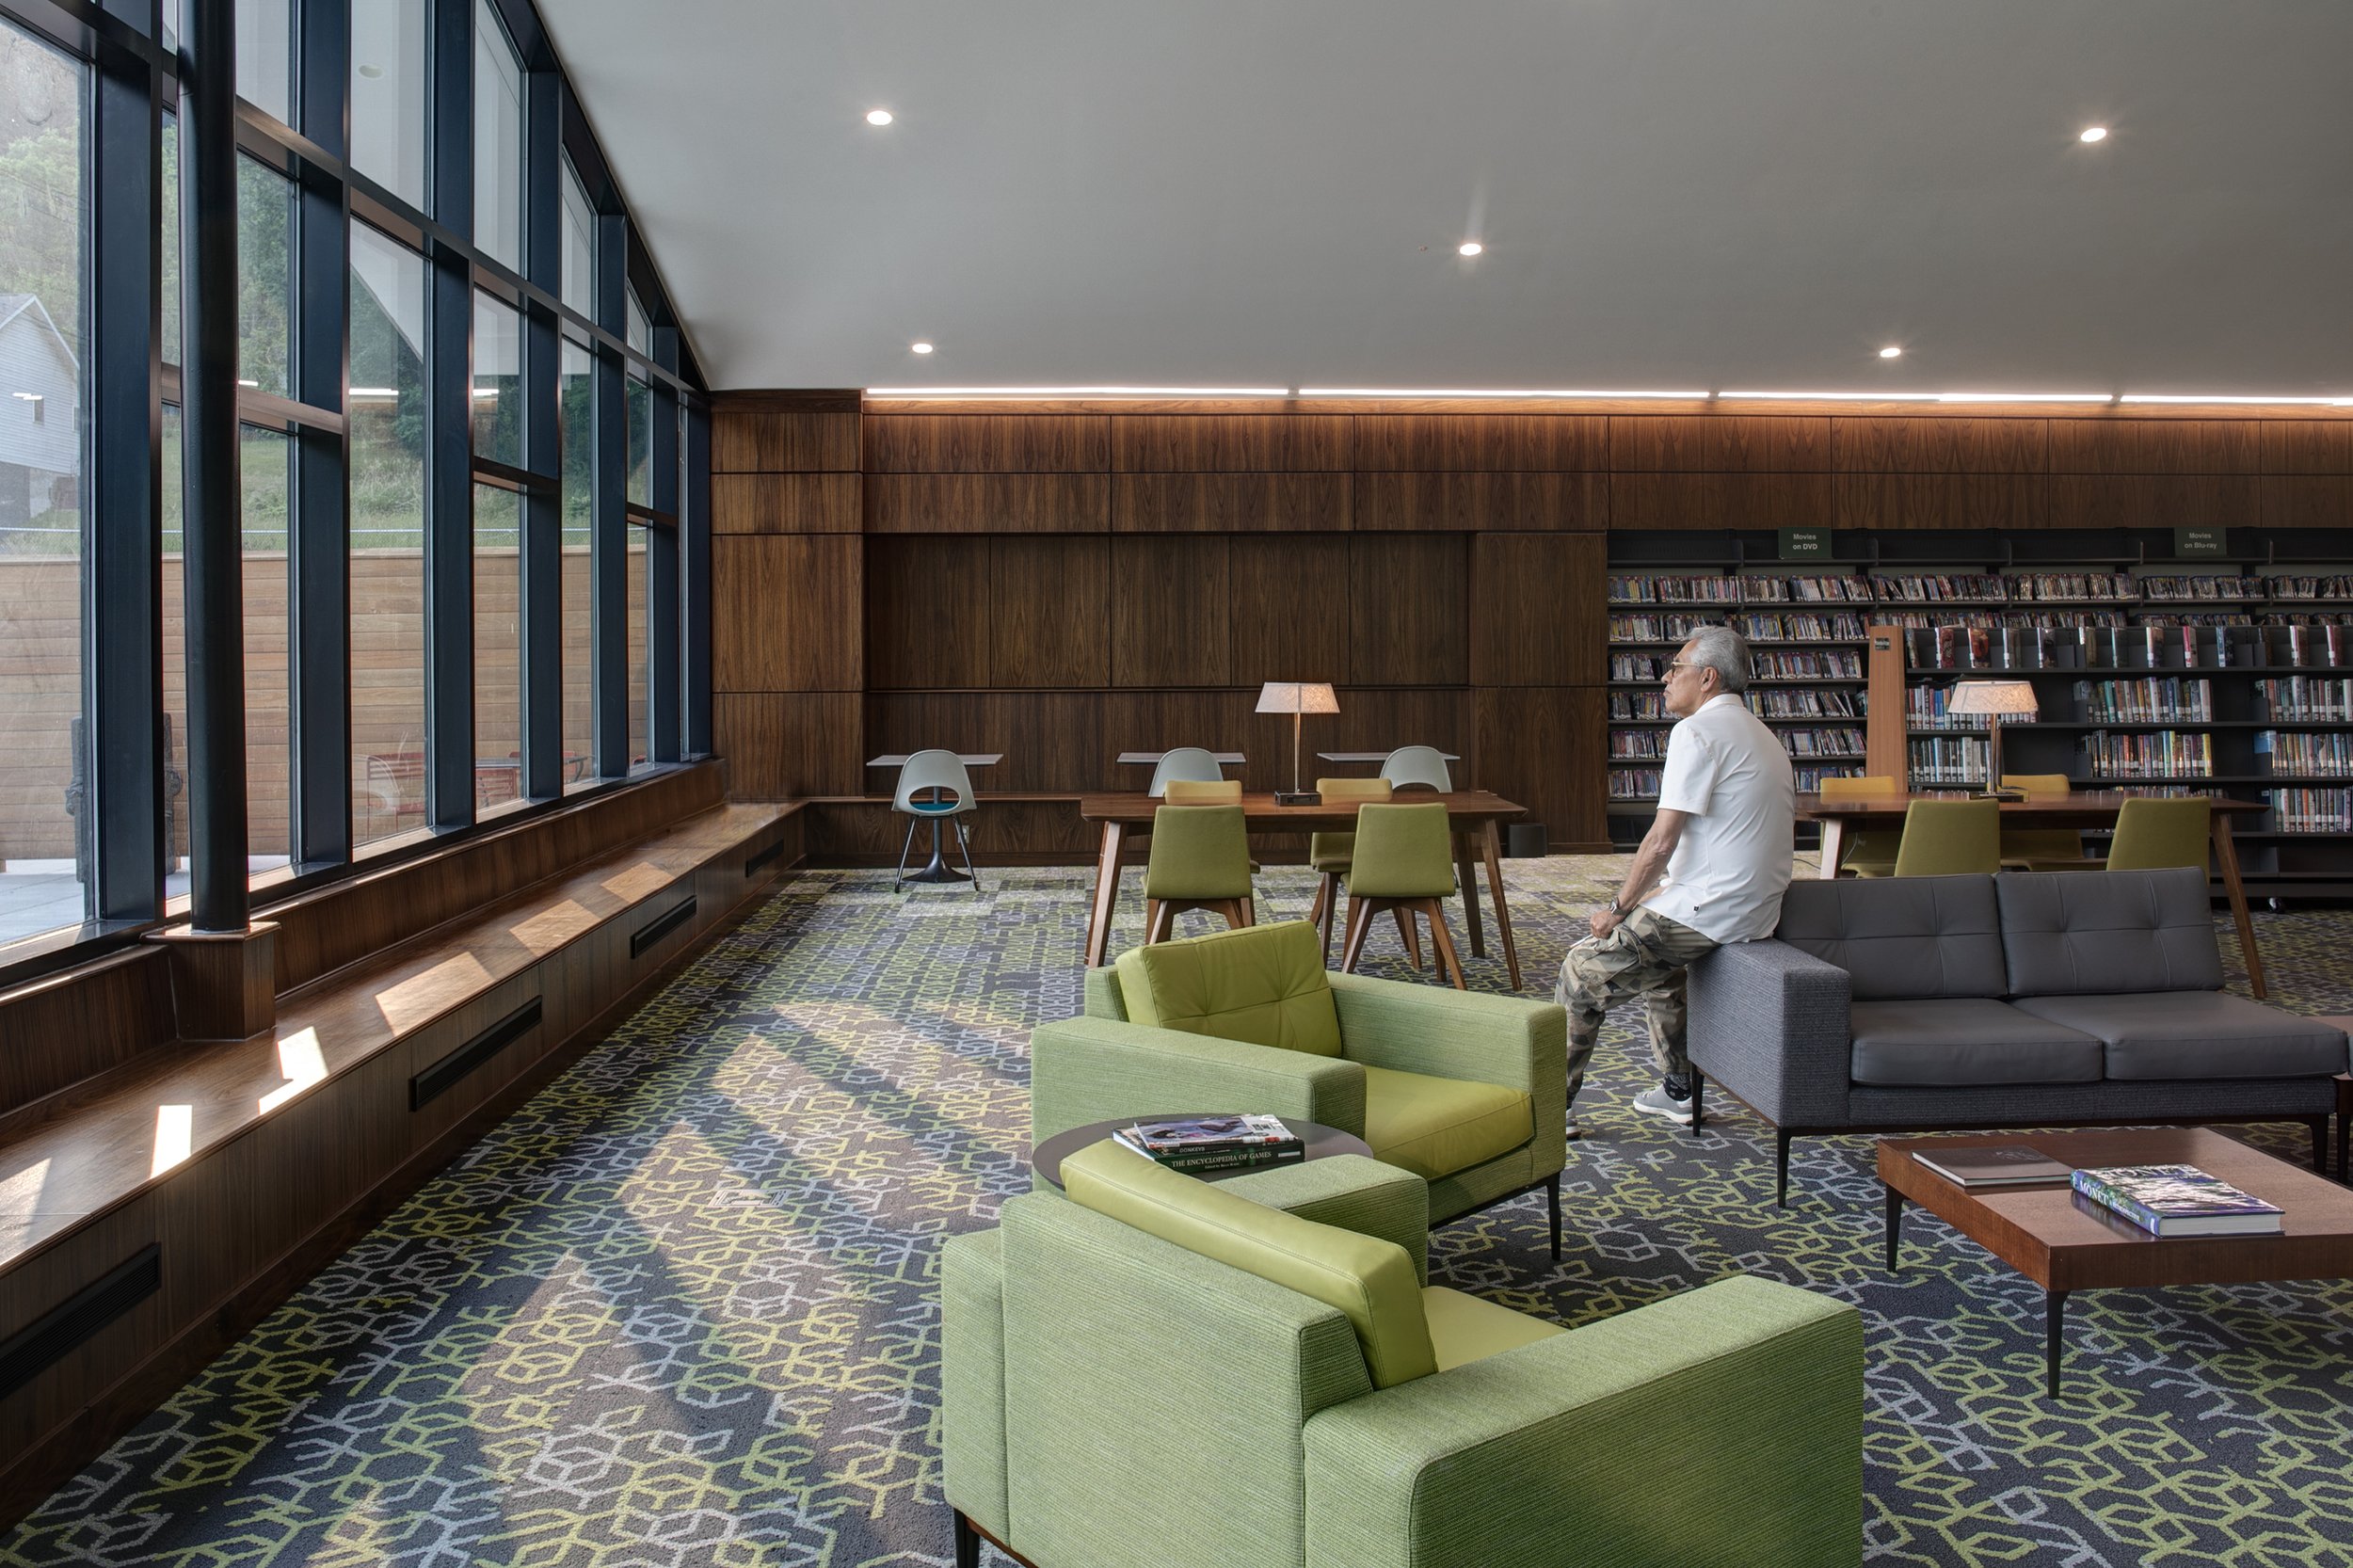  LaVale Library - Murphy &amp; Dittenhafer Interiors Studio Design Project 